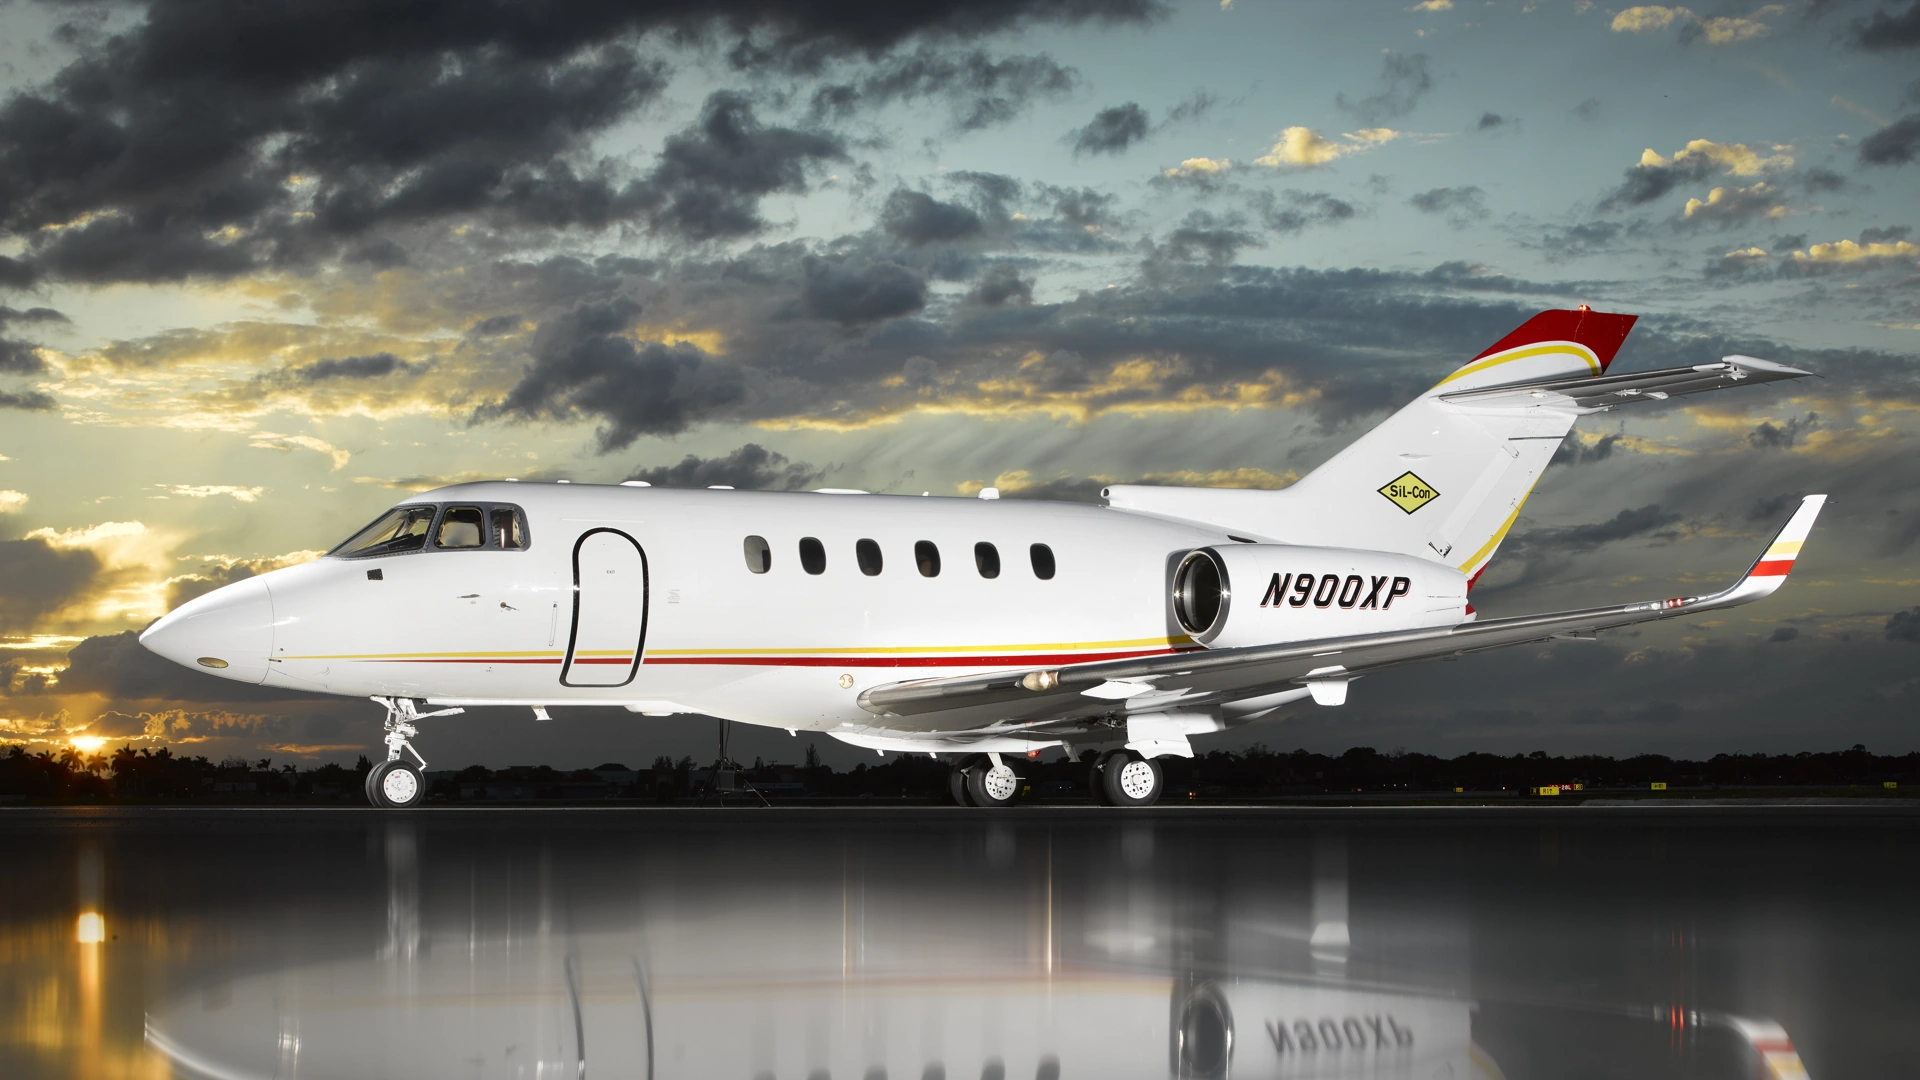 Alerion Hawker 900XP - N900XP available for private charter by Alerion Aviation.